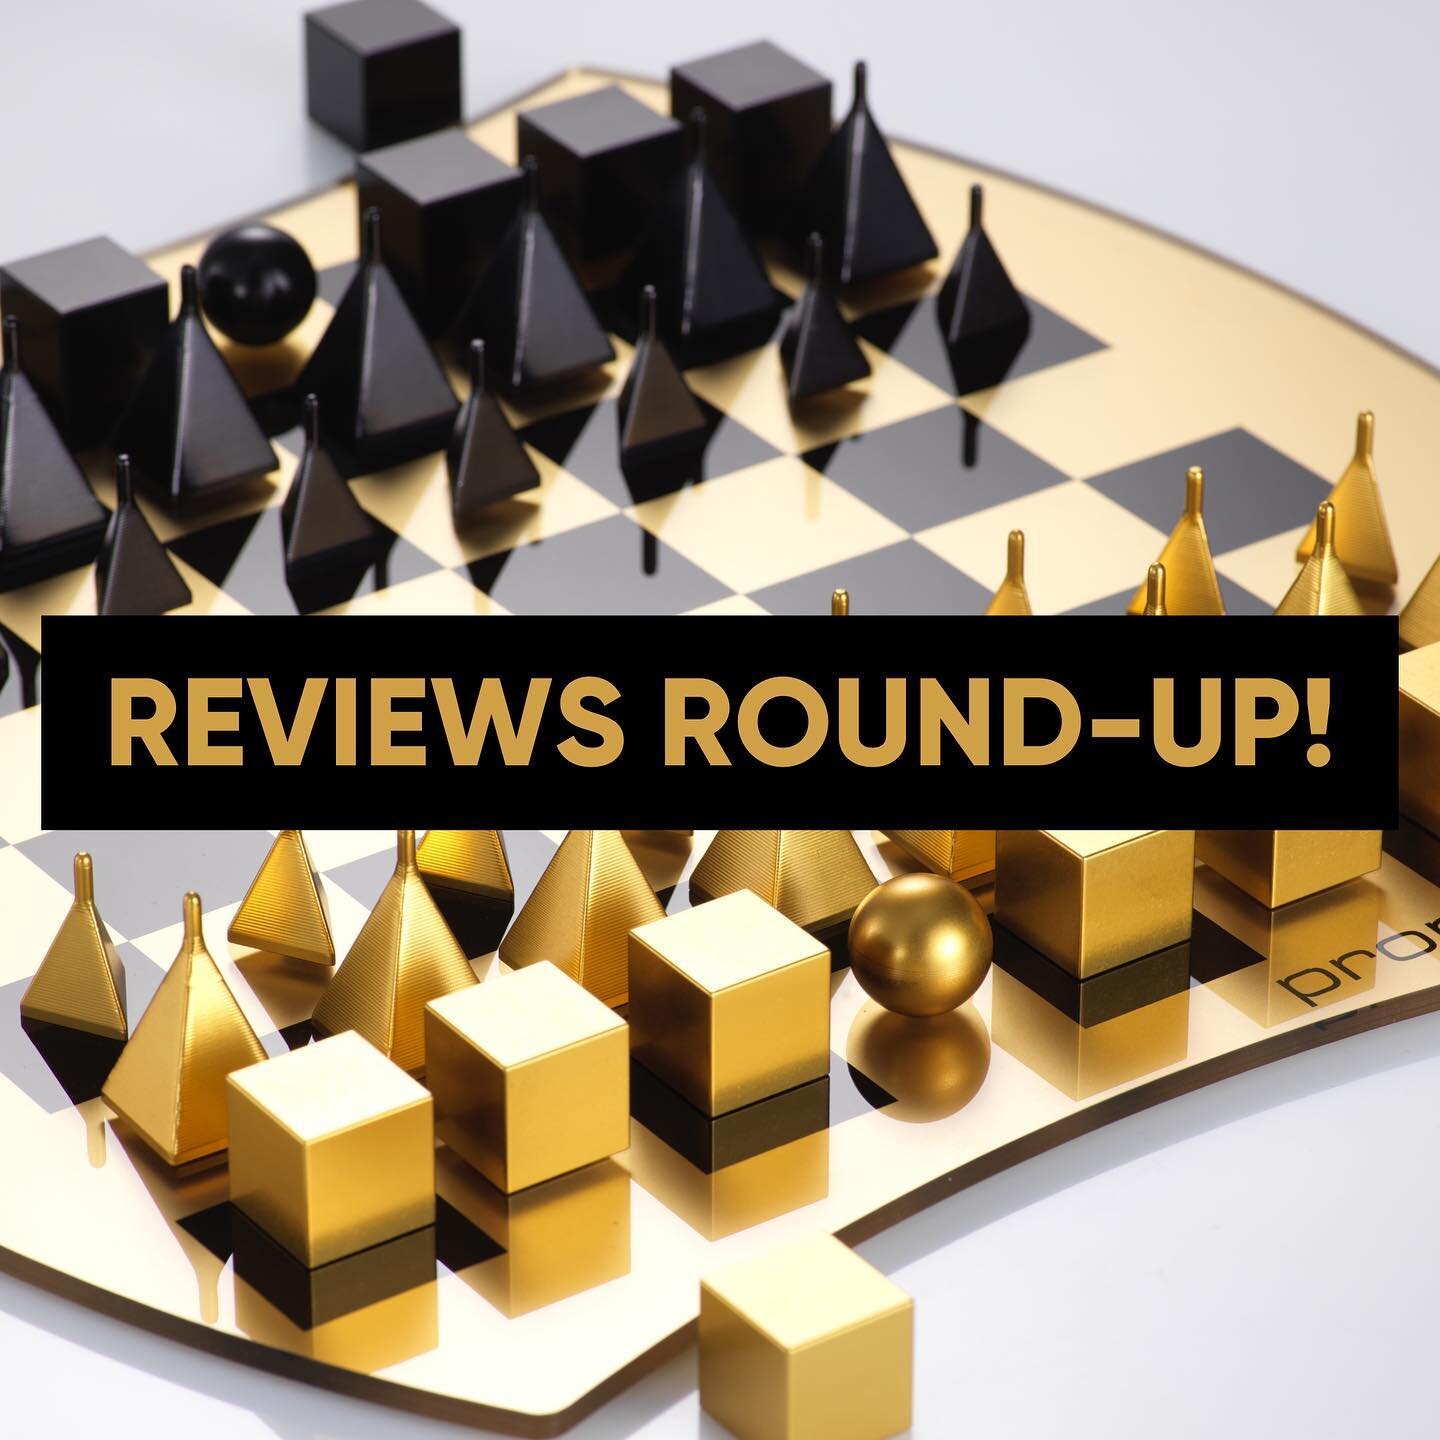 Happy National Board Game Day!

Check out some reviews of Prometheus from the past few months. You may recognise some names! The Prometheus Team are very thankful for all of your positive words, and we are so glad everyone is enjoying it.

If you wou